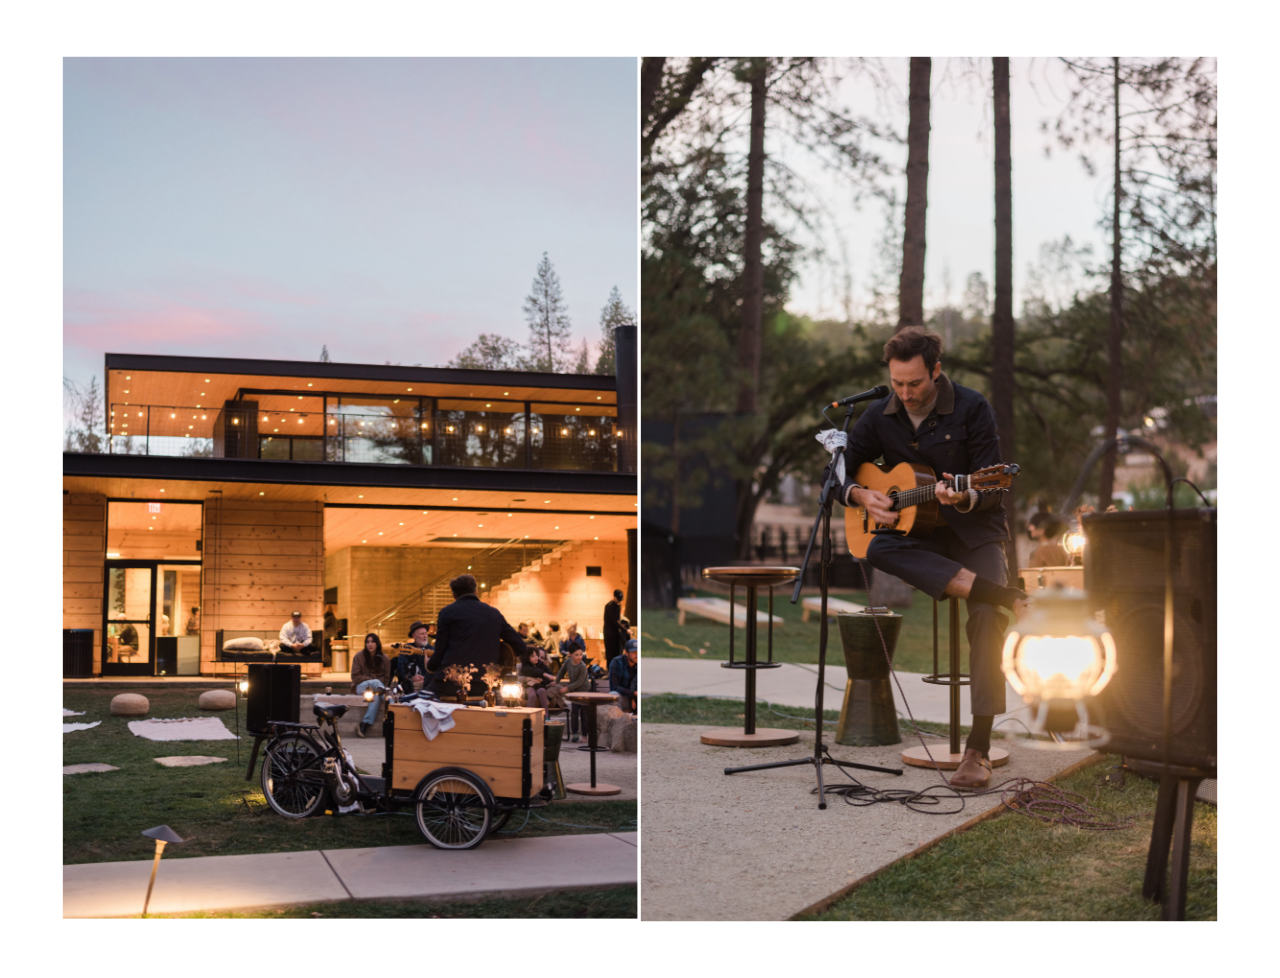 Matt Costa performed live music until the sun set dreamily behind the mountains at Autocamp Yosemite